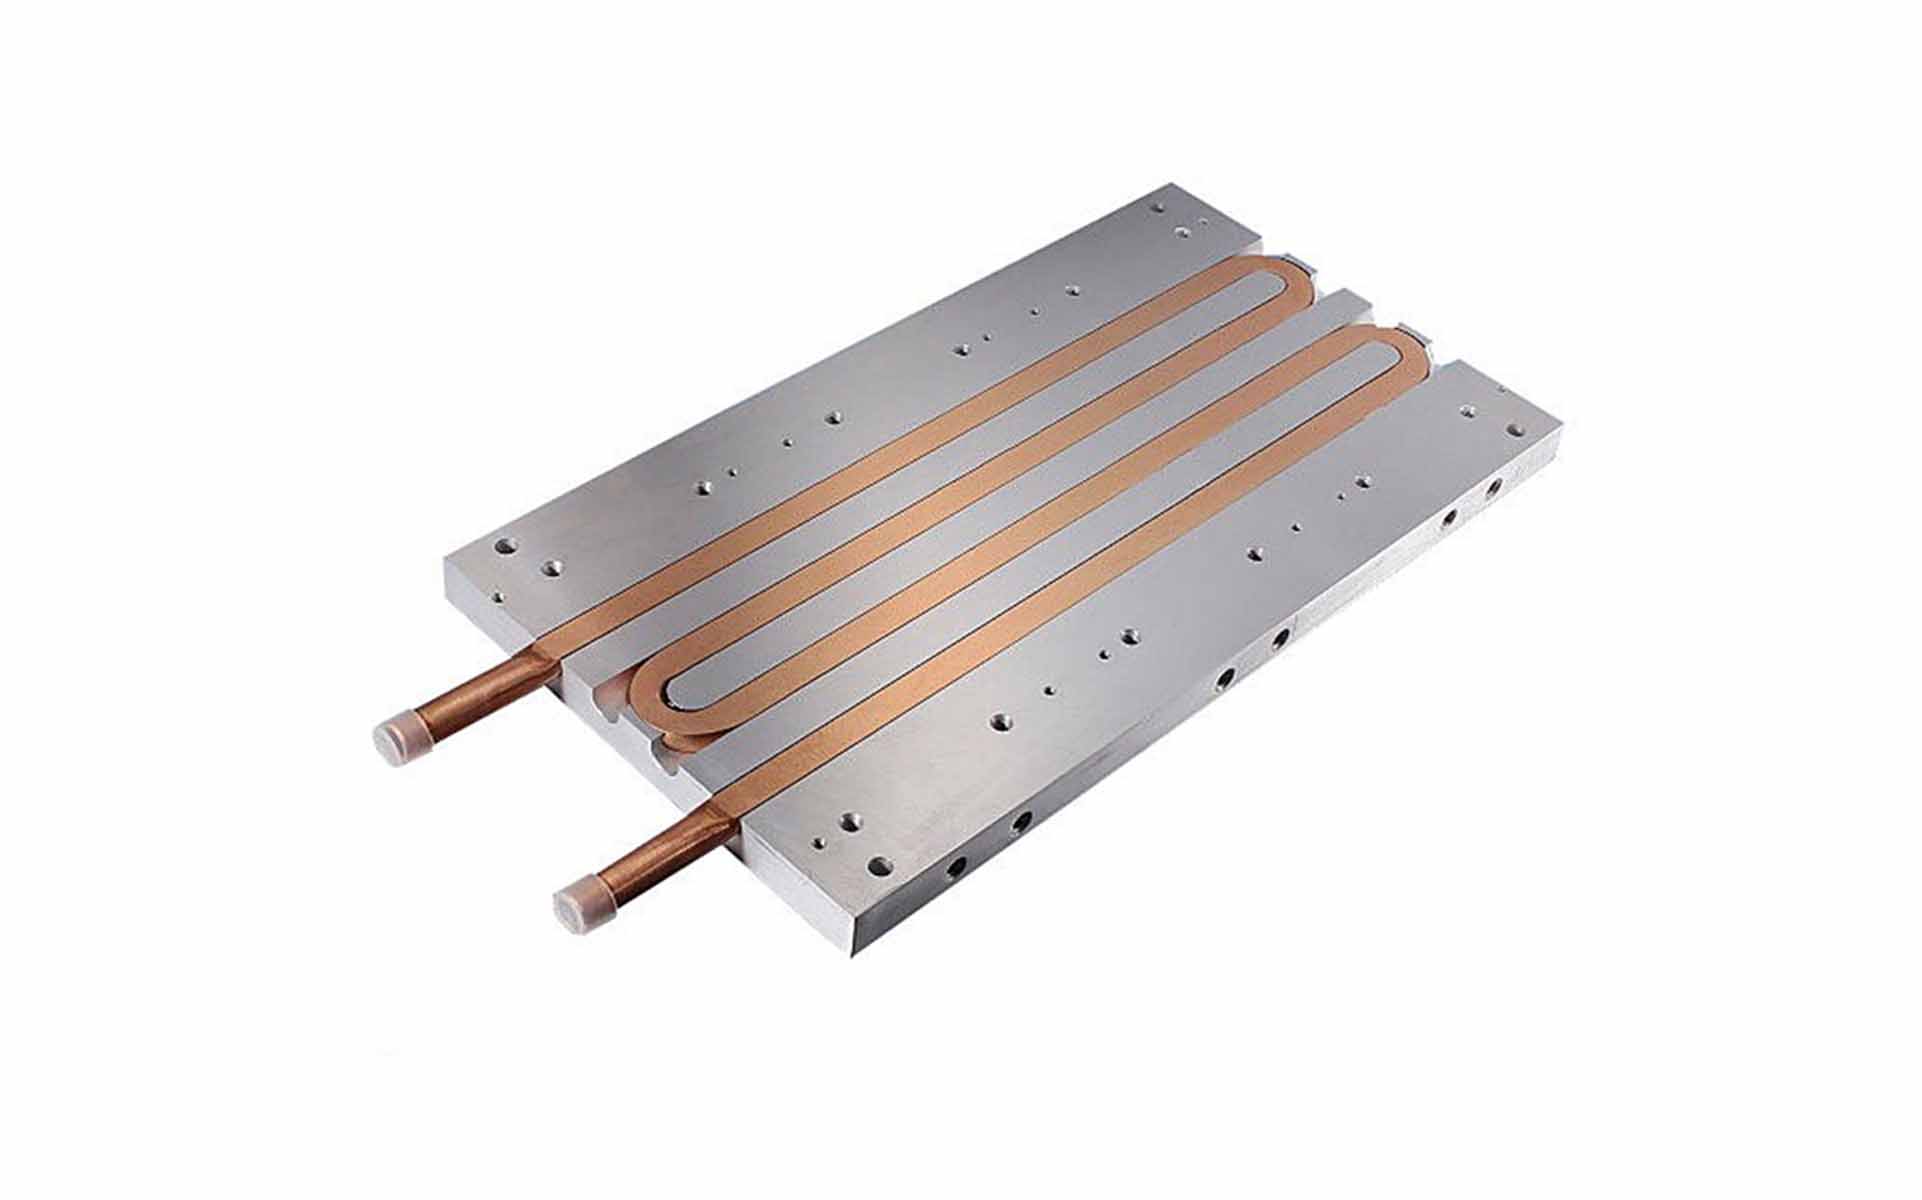 What Are The Types Of Liquid Cold Plates?